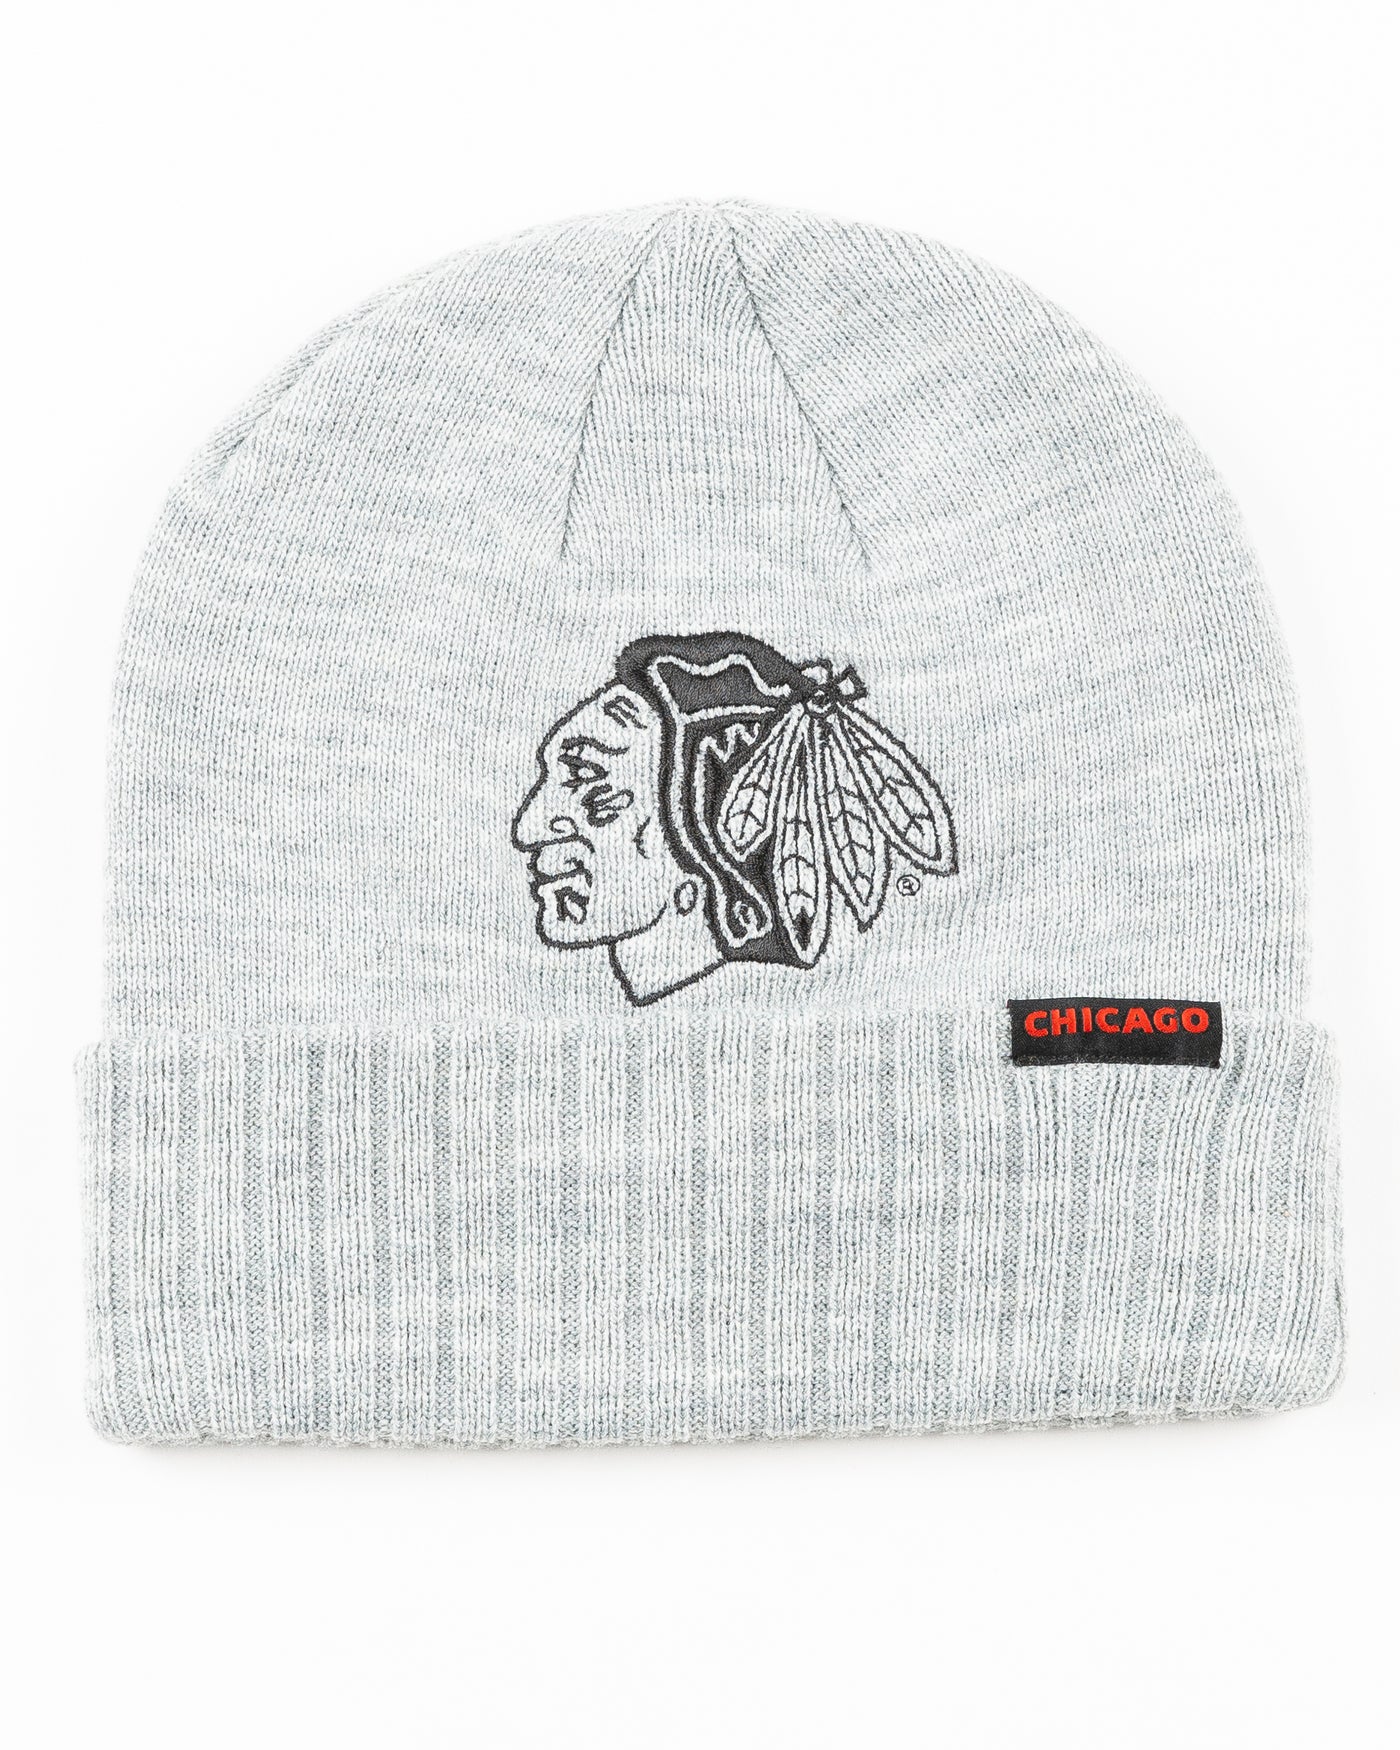 grey cuffed Sportiqe beanie with Chicago Blackhawks tonal primary logo on nfront and mini Chicago patch on cuff - front lay flat